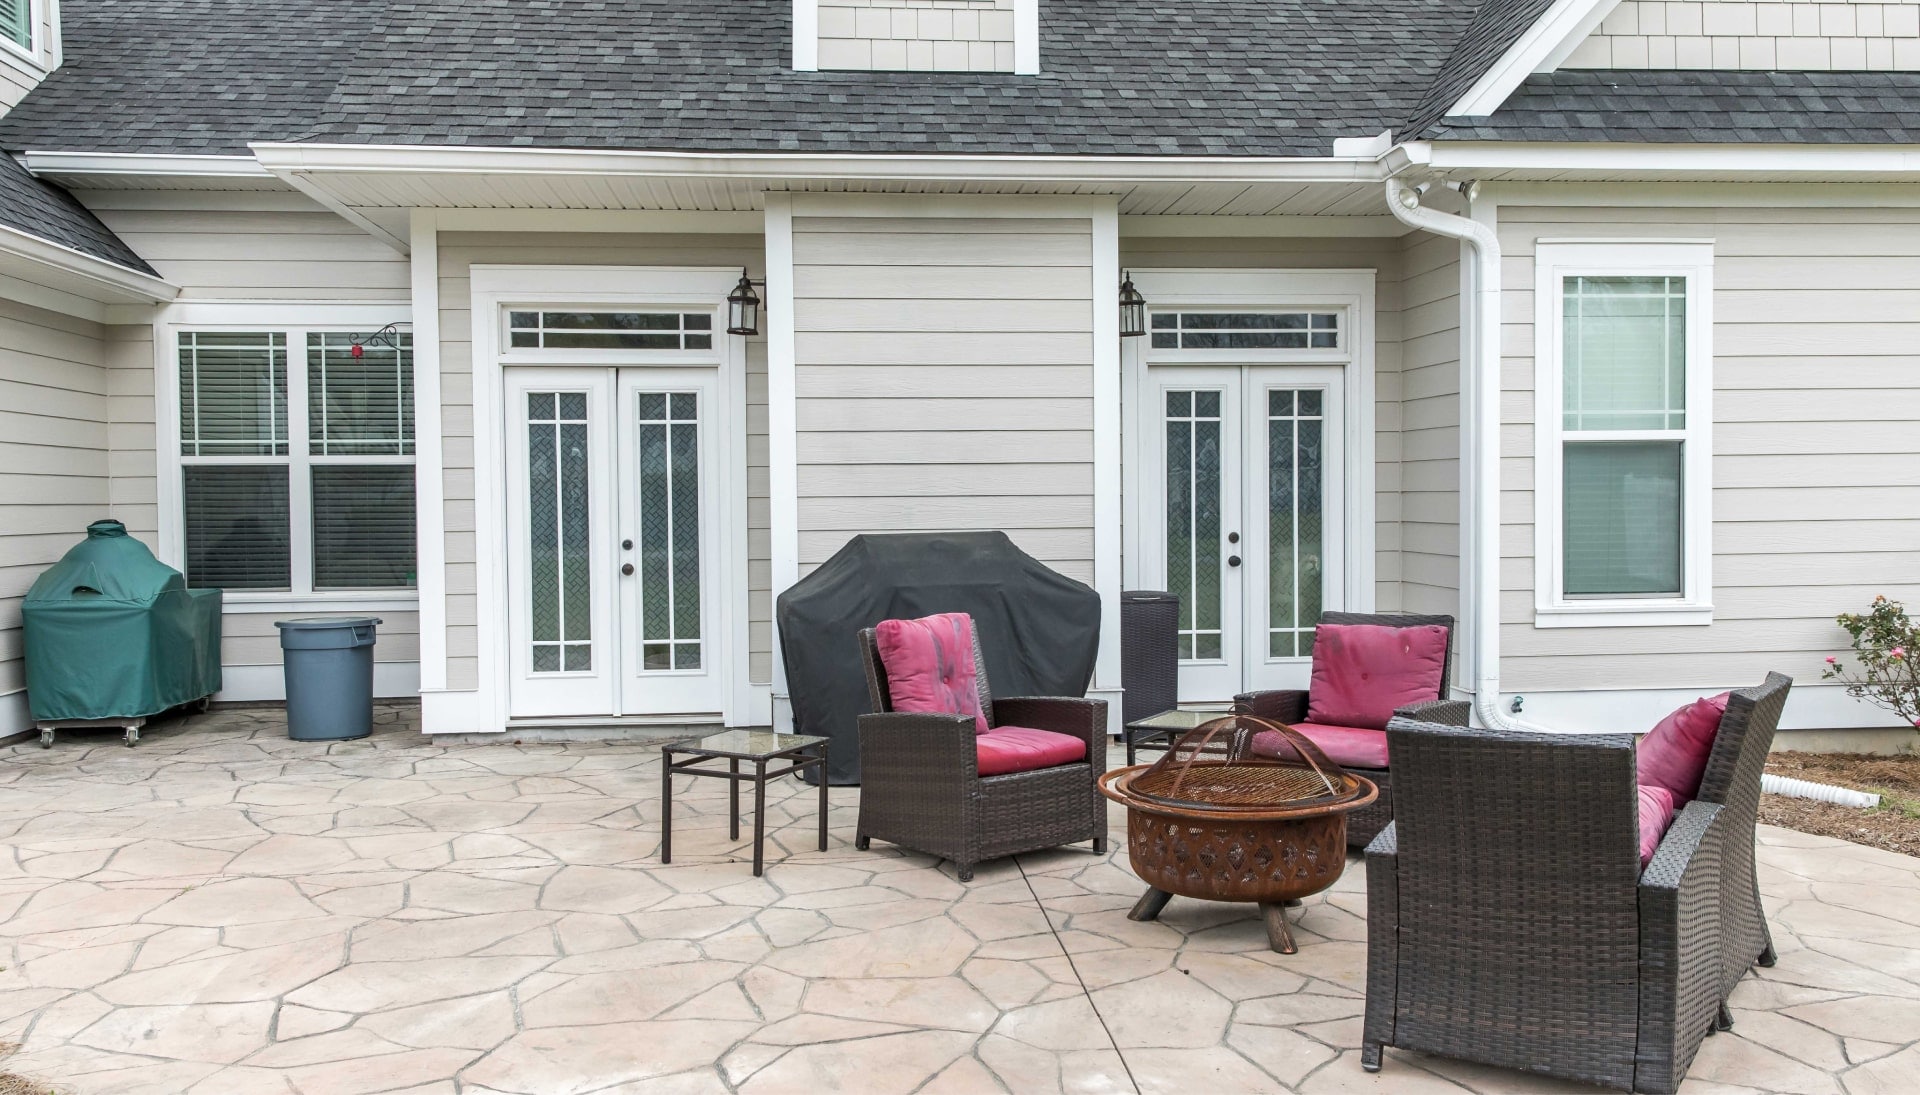 Elevate Your Outdoor Living Space with Stunning Stamped Concrete Patio in Pleasant Hill, CA - Choose from a Variety of Creative Patterns and Colors to Achieve a Unique and Eye-Catching Look for Your Patio with Long-Lasting Durability and Low-Maintenance.